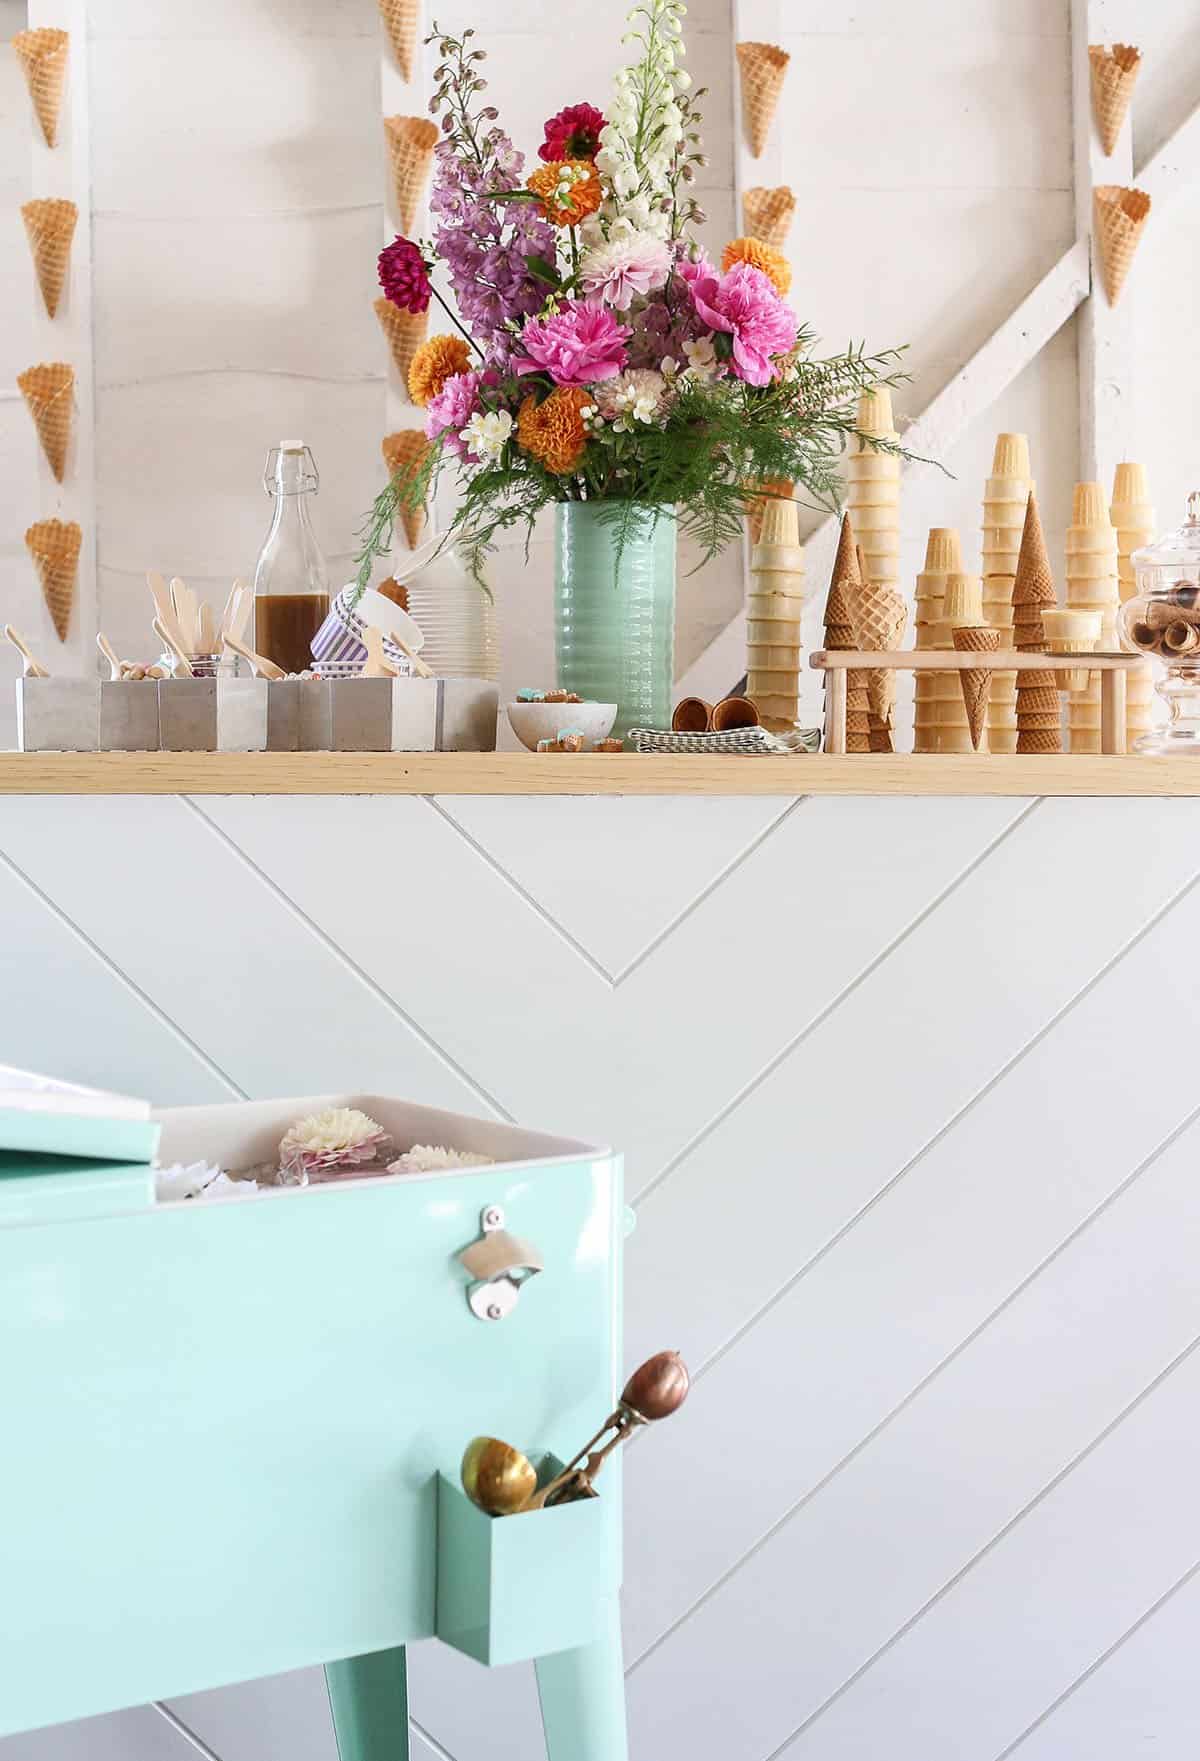 Ice cream bar with pink flowers and a green cooler with ice cream tubs.